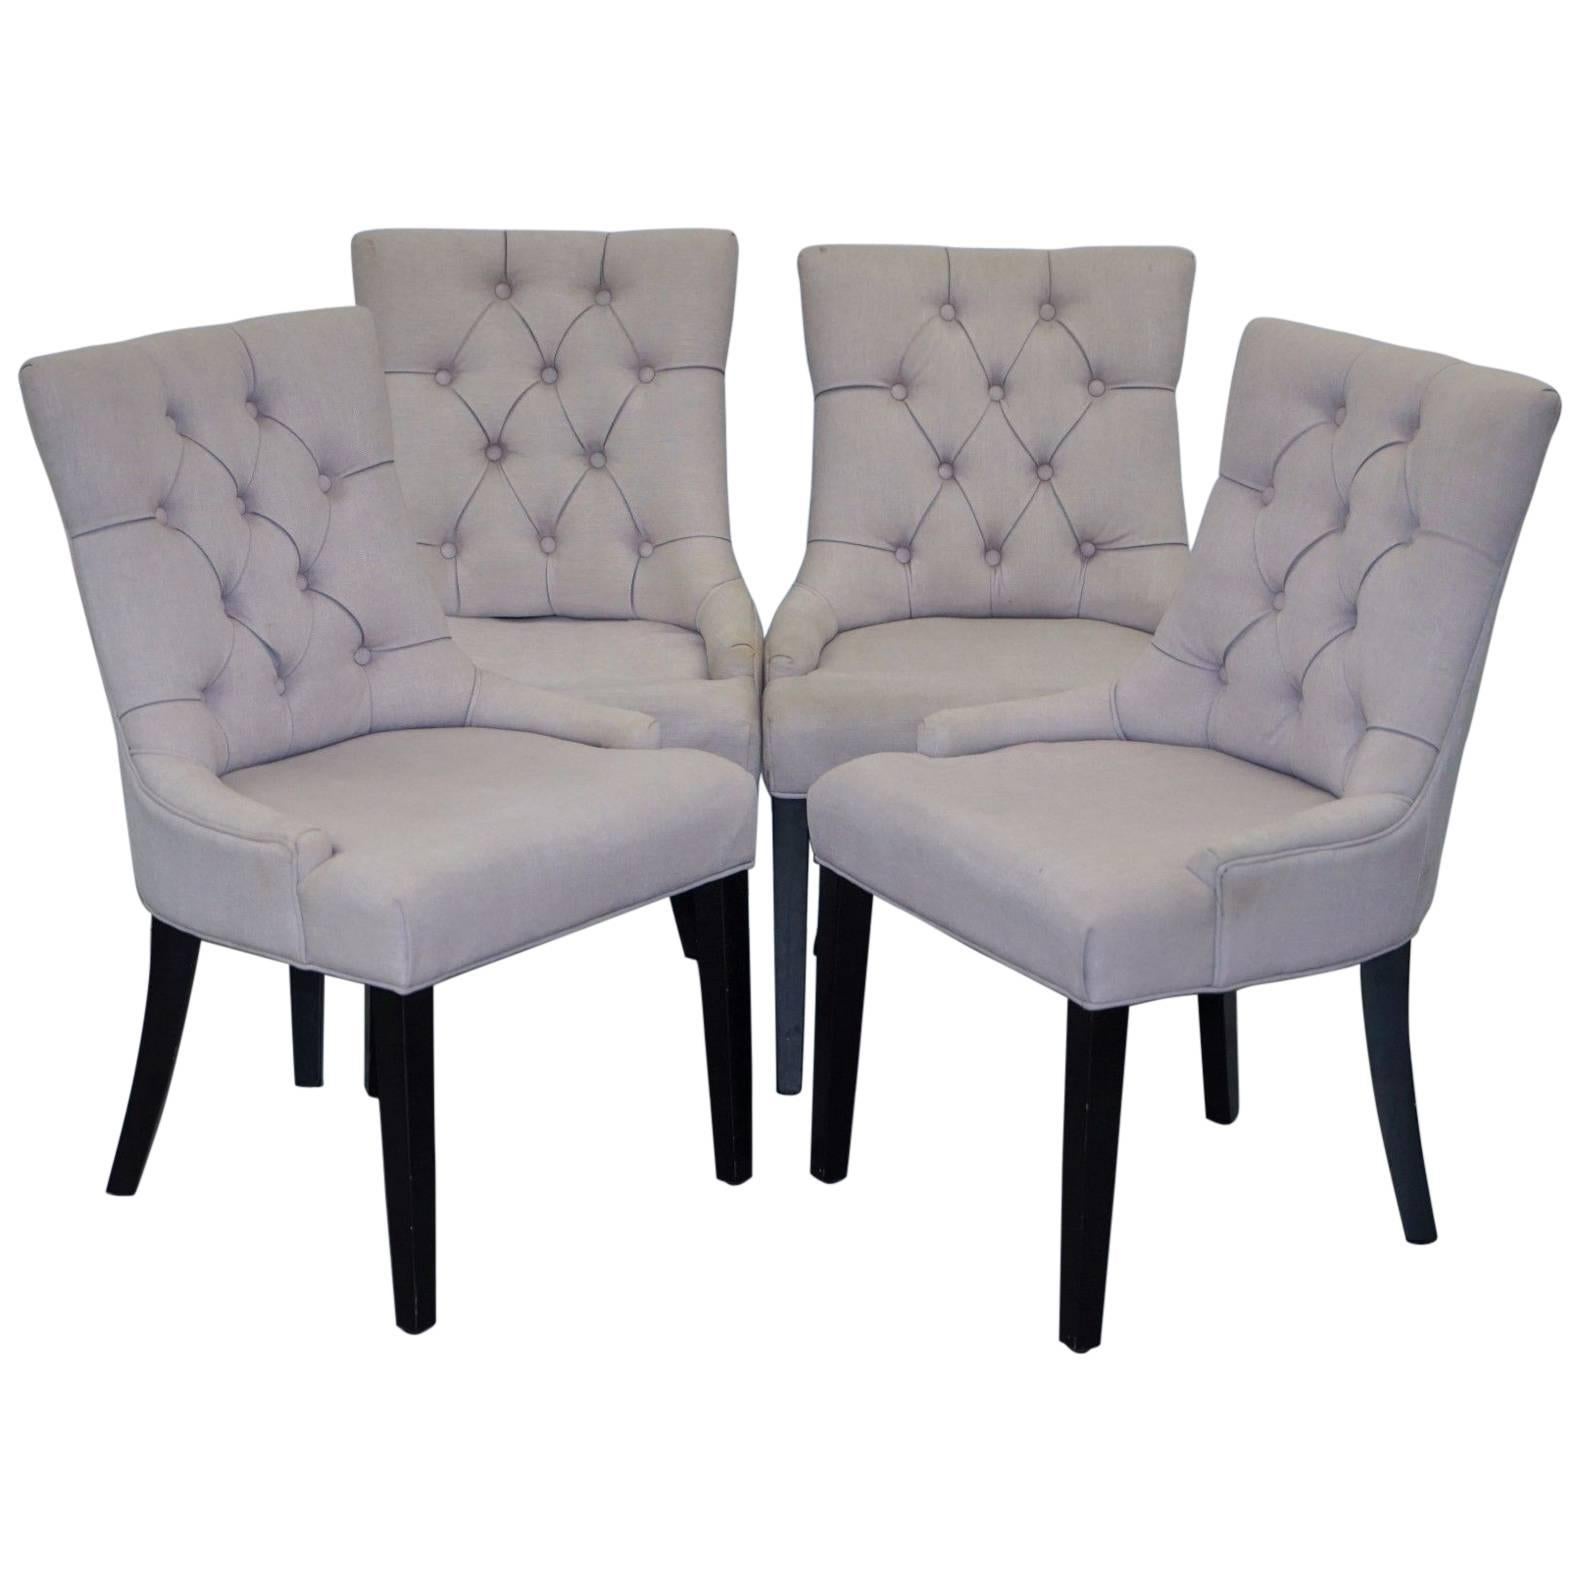 Set of Four Dining Chairs, Grey Fabric Chesterfield